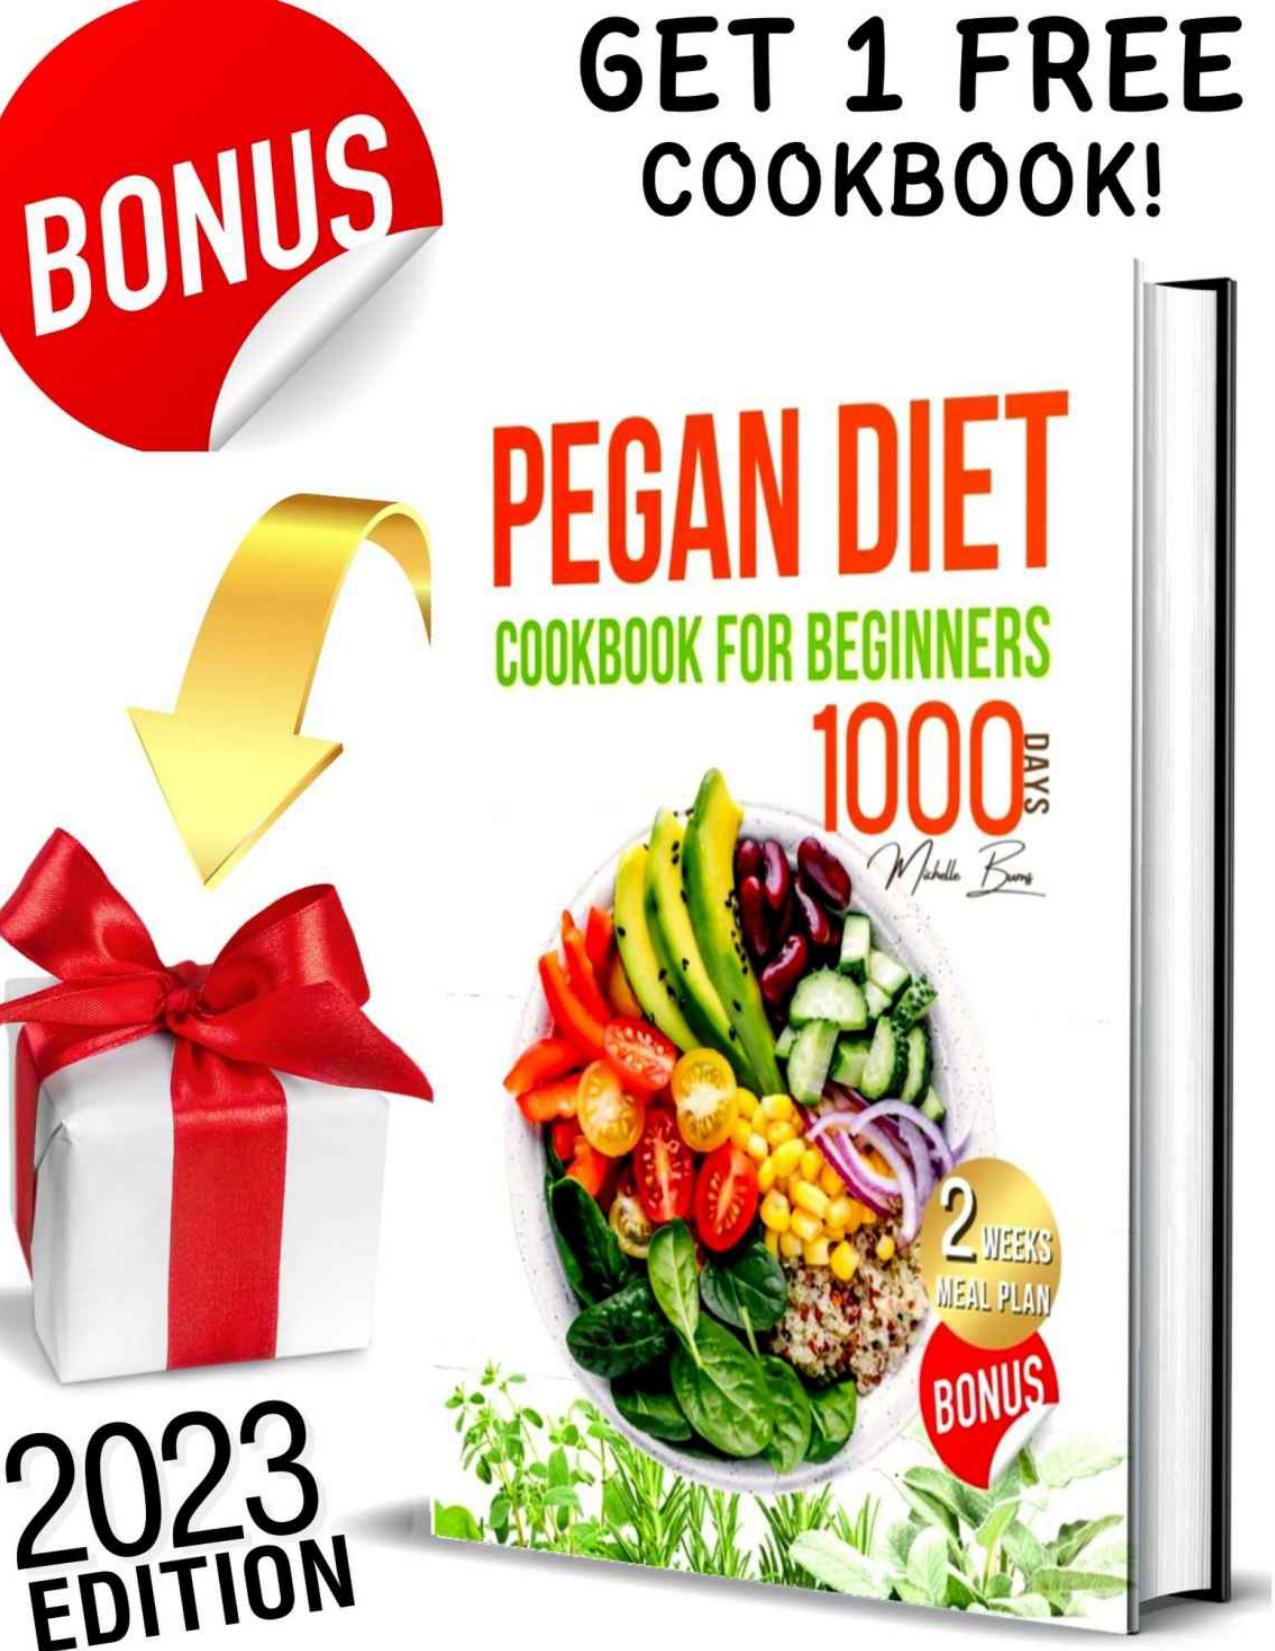 Pegan Diet Cookbook for Beginners by Burns Michelle